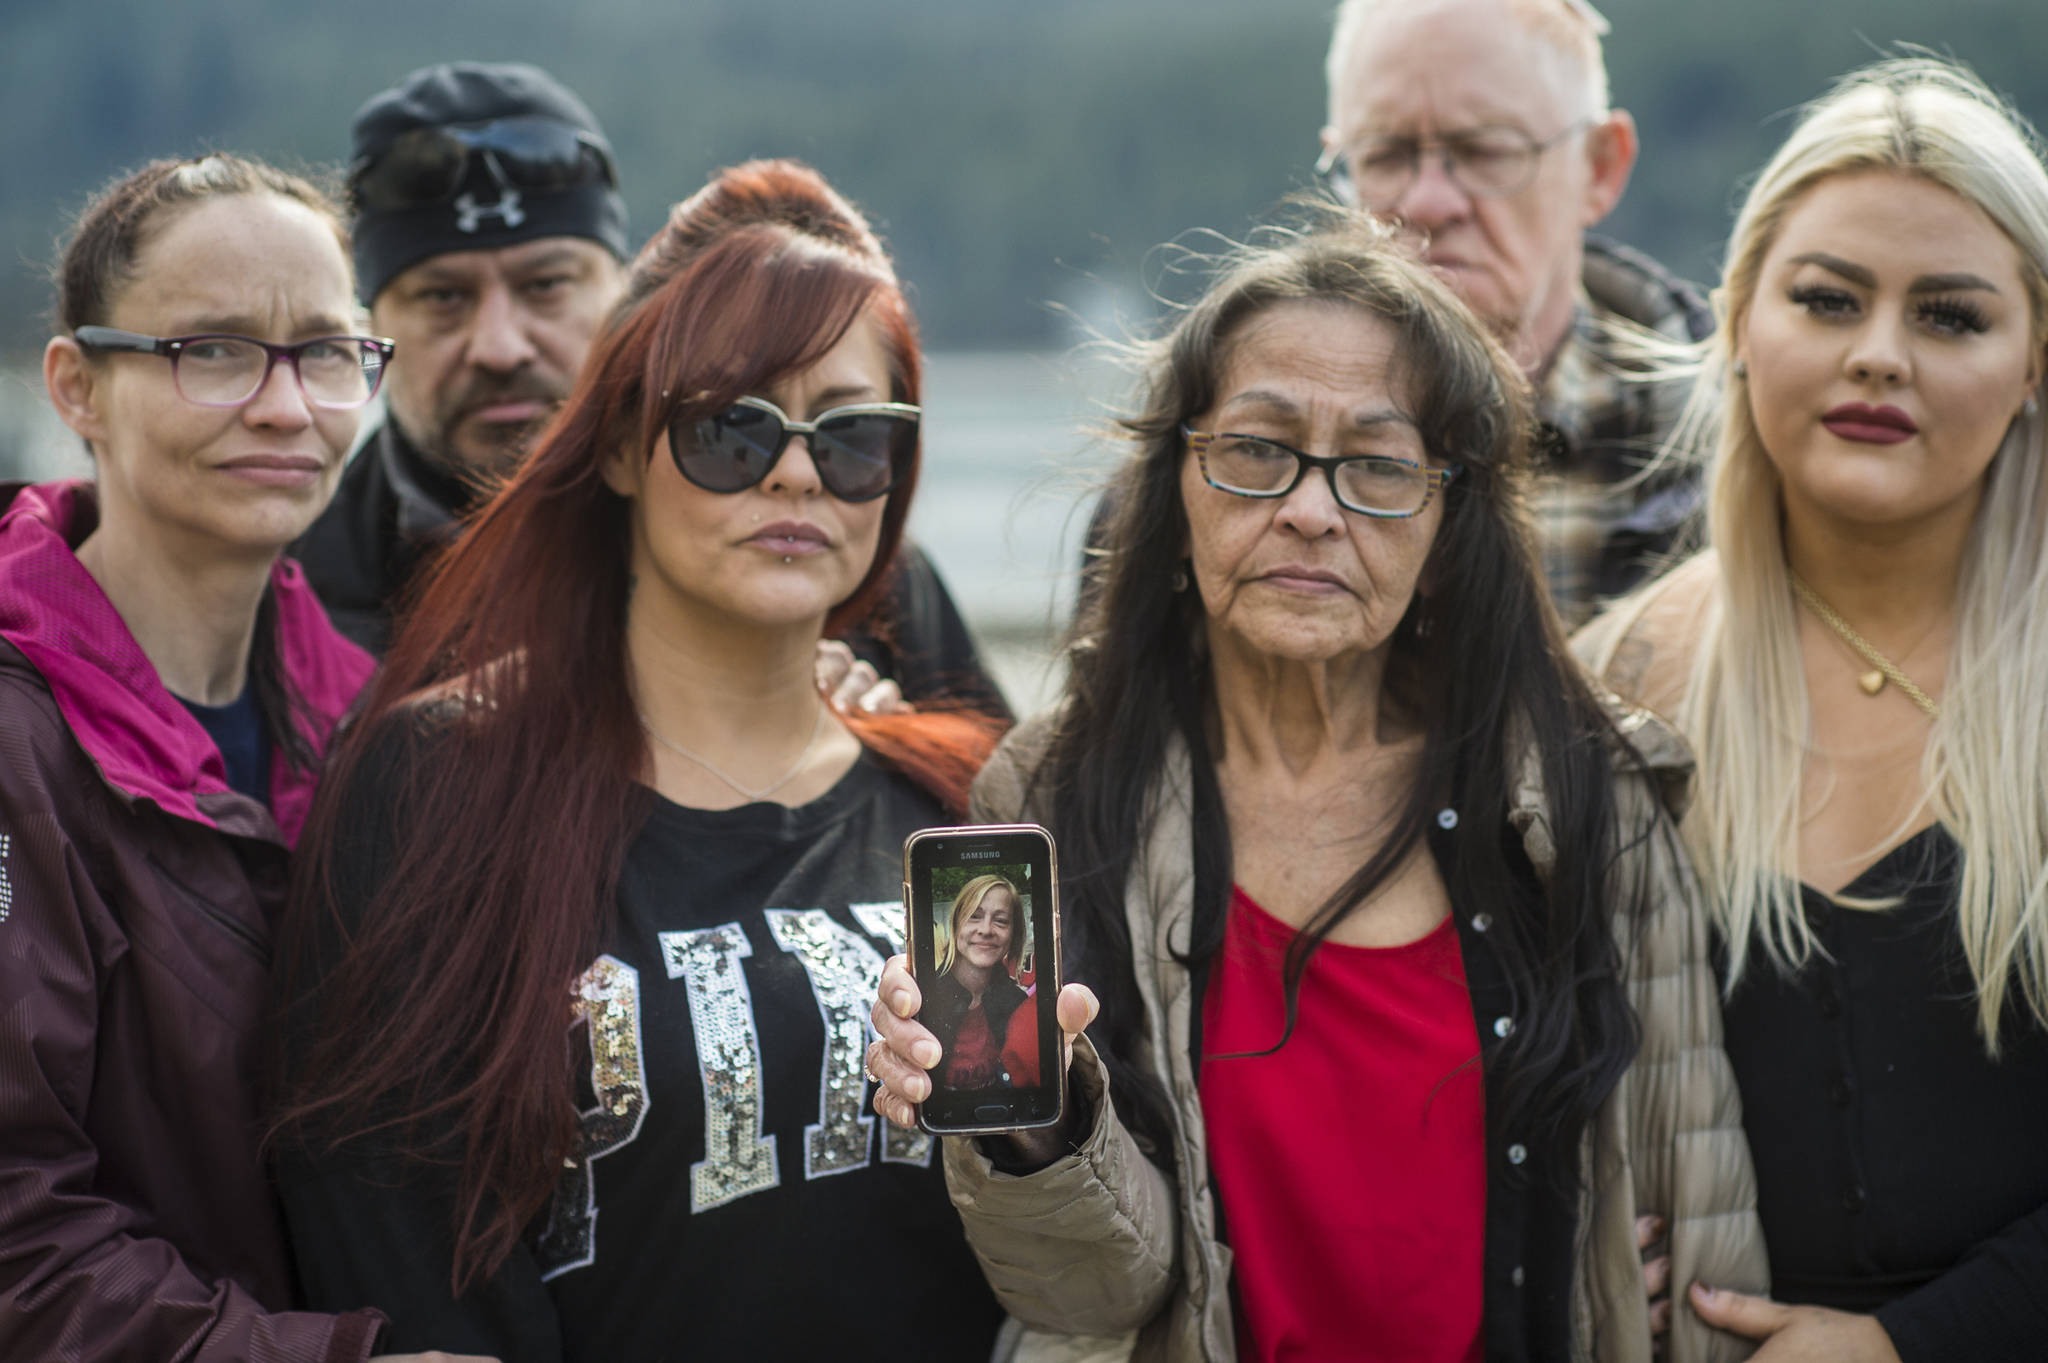 Family members of Tracy Day have been looking for her since Feb. 14. From left: Sister Angela Day-Nalan, brother John Day, Jr., sister Crystal Delgado, mother Lilly Day, father John Day, Sr., daughter Kaelyn Schneider. (Michael Penn | Juneau Empire)